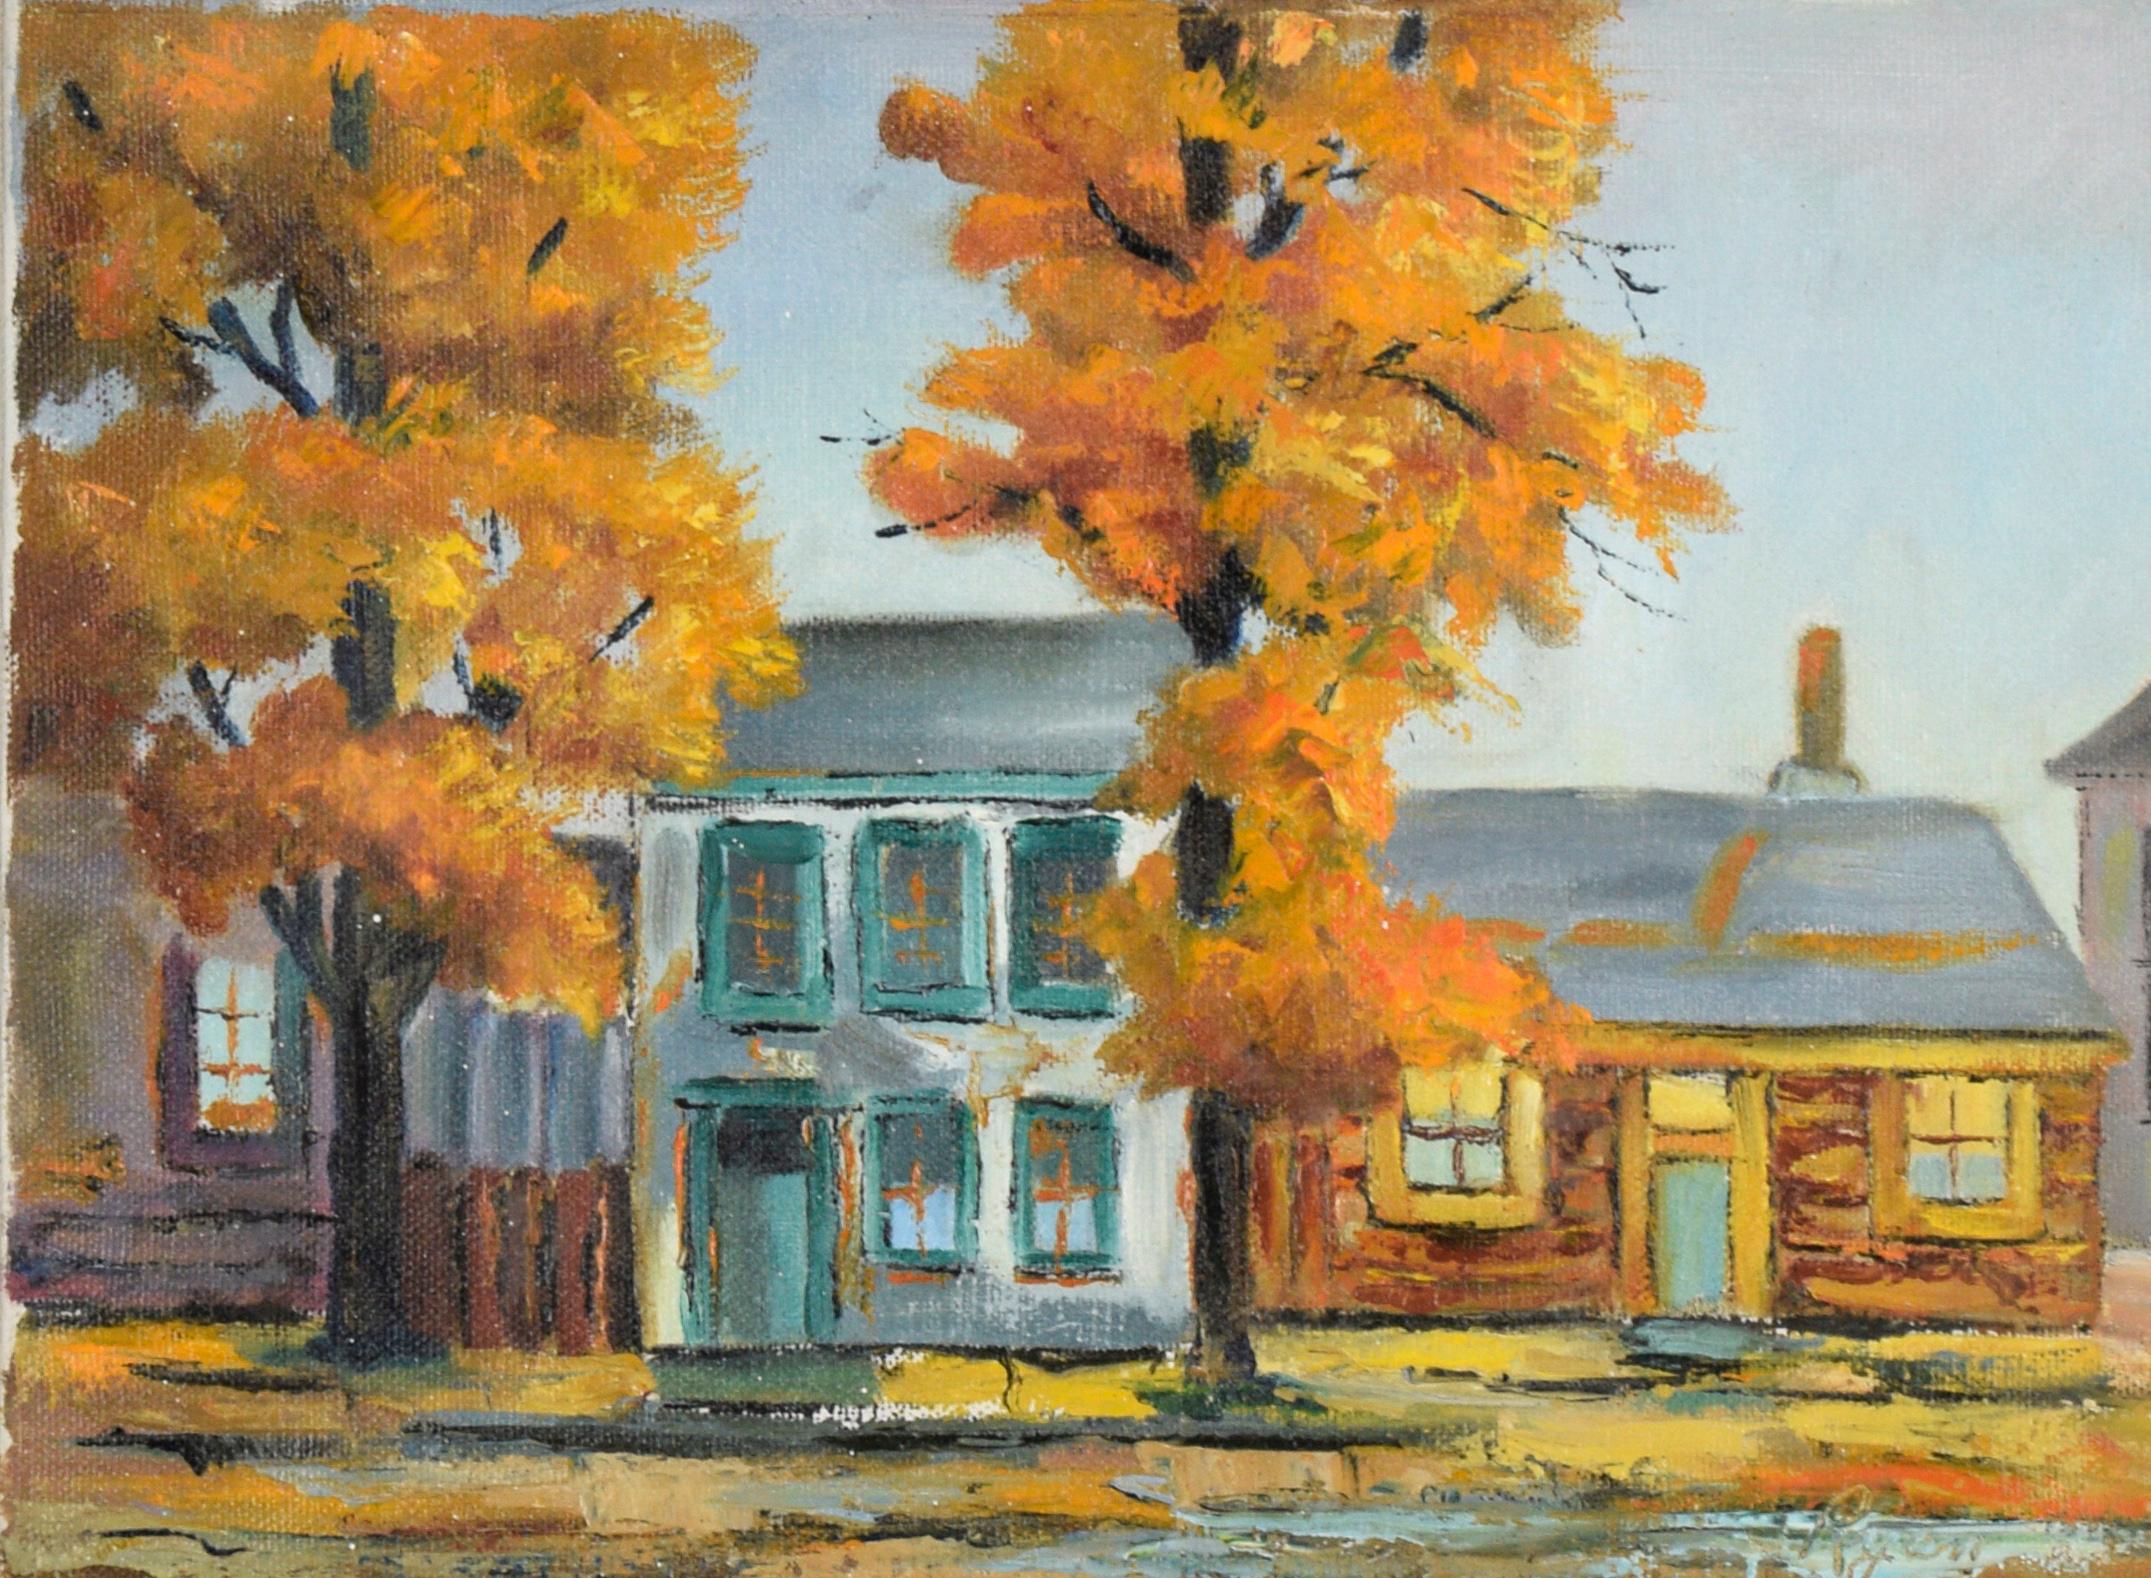 Autumn in the Suburbs, Landscape - Painting by Unknown